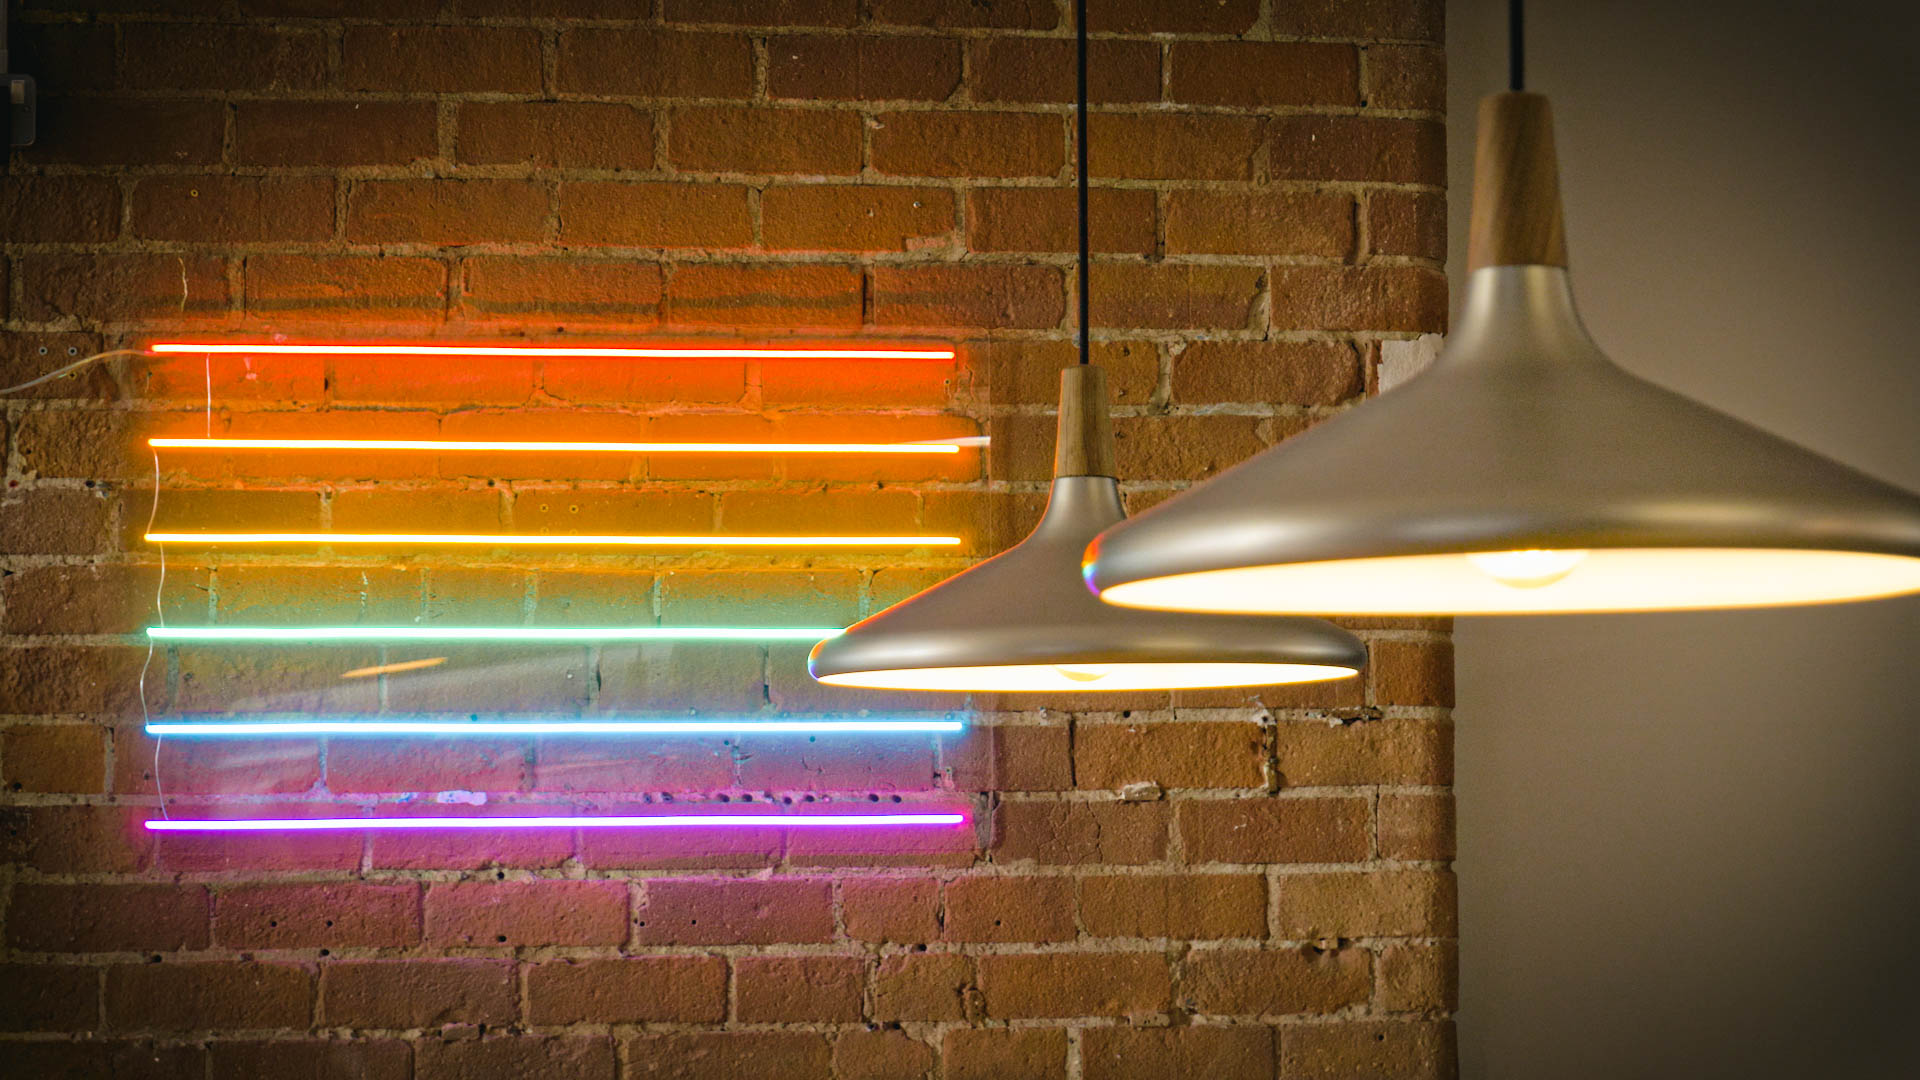 Photograph of a neon rainbow sign on the wall of the EMEA Recruitment office kitchen, with two ceiling lights hanging down in front of it